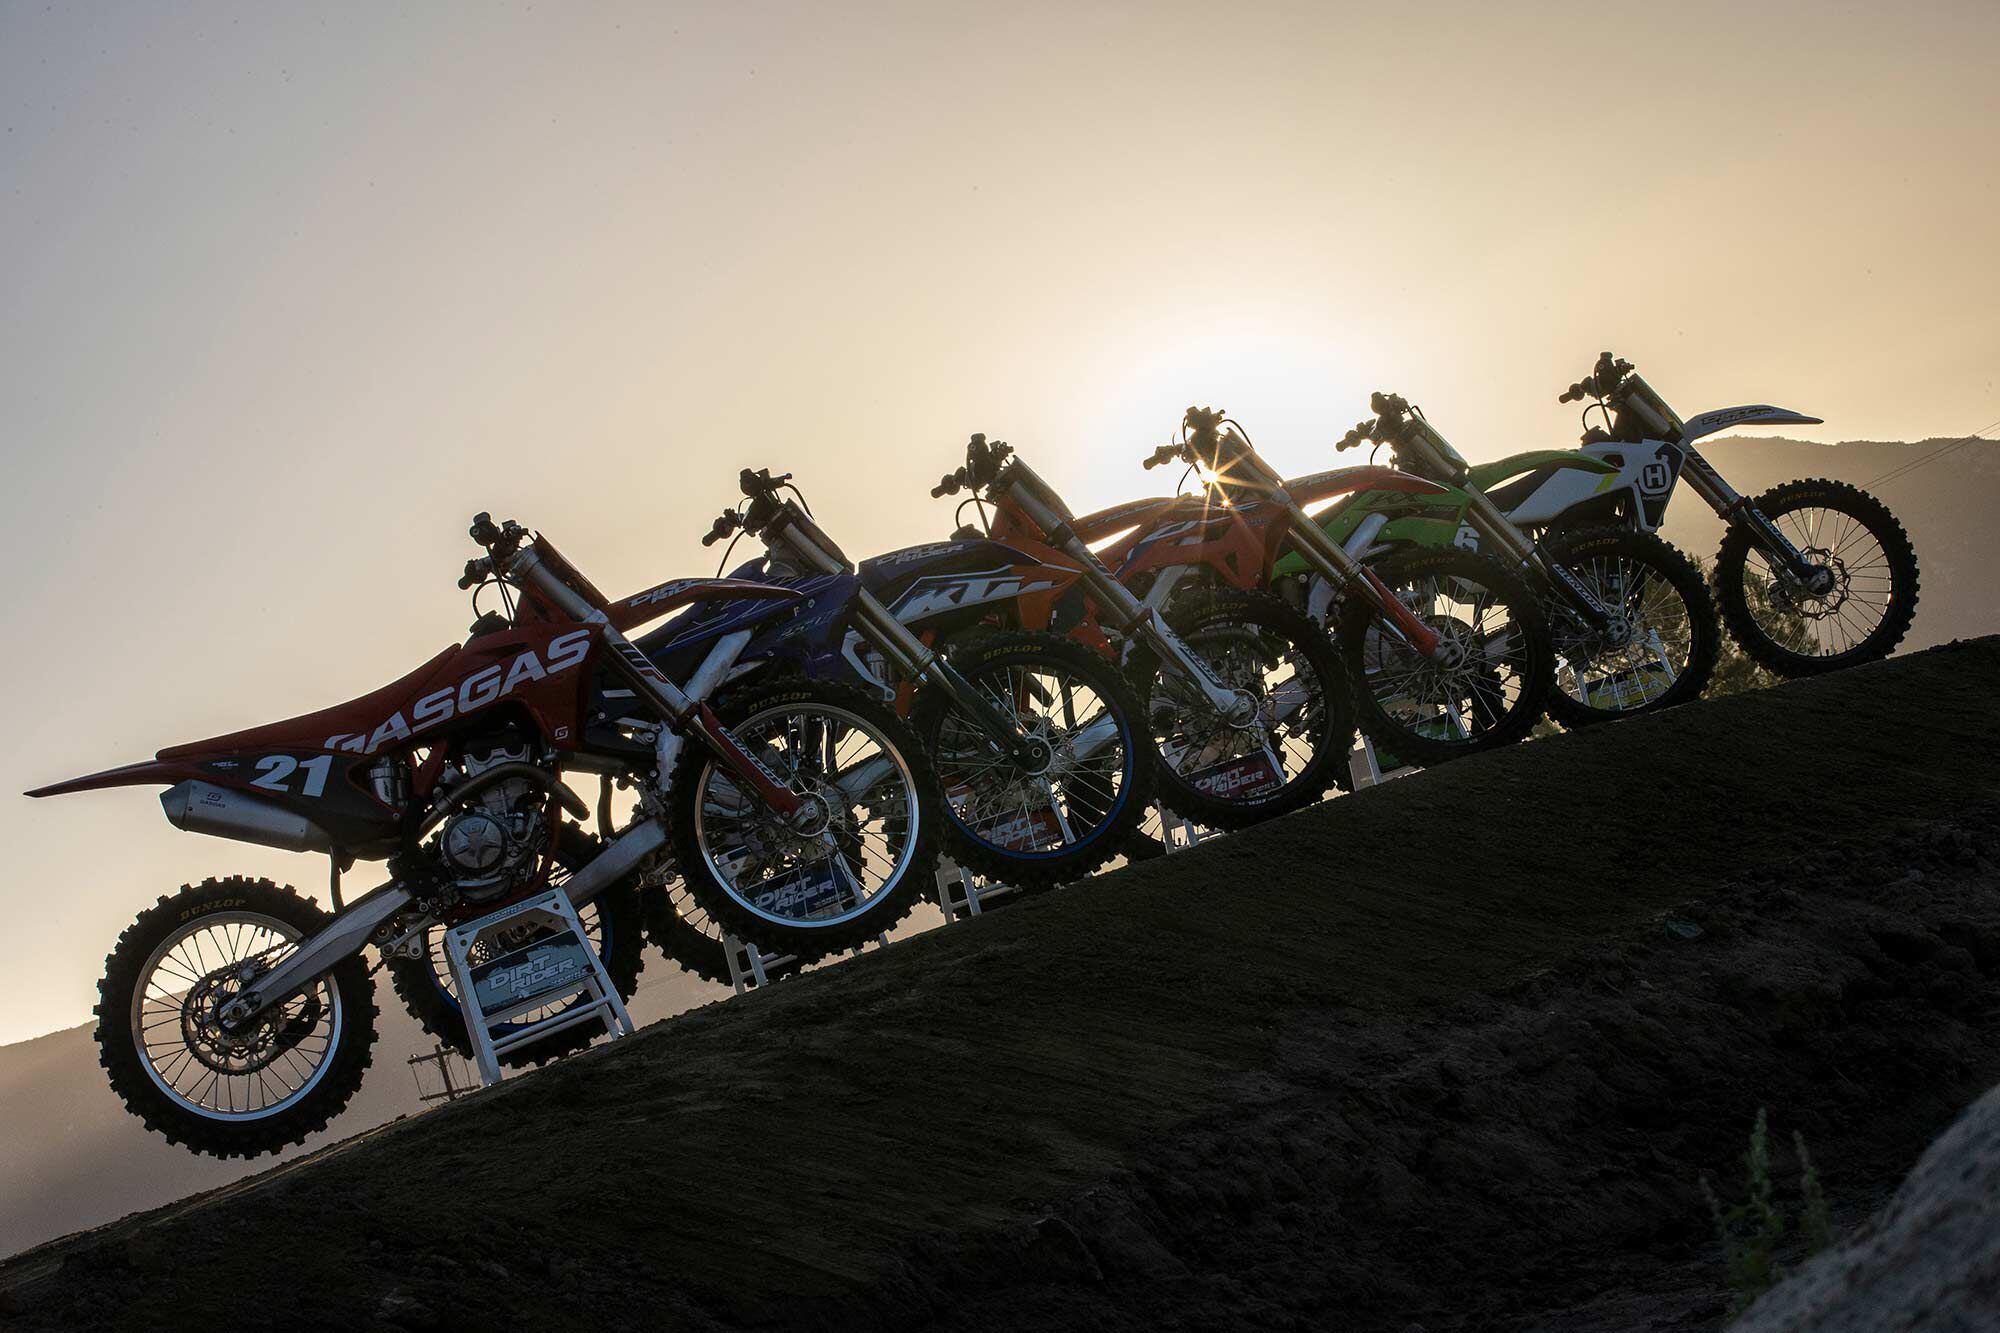 Bike stands for the six motorcycles were supplied by Works Connection. Fox Raceway provided the backdrop for all static and action shots.